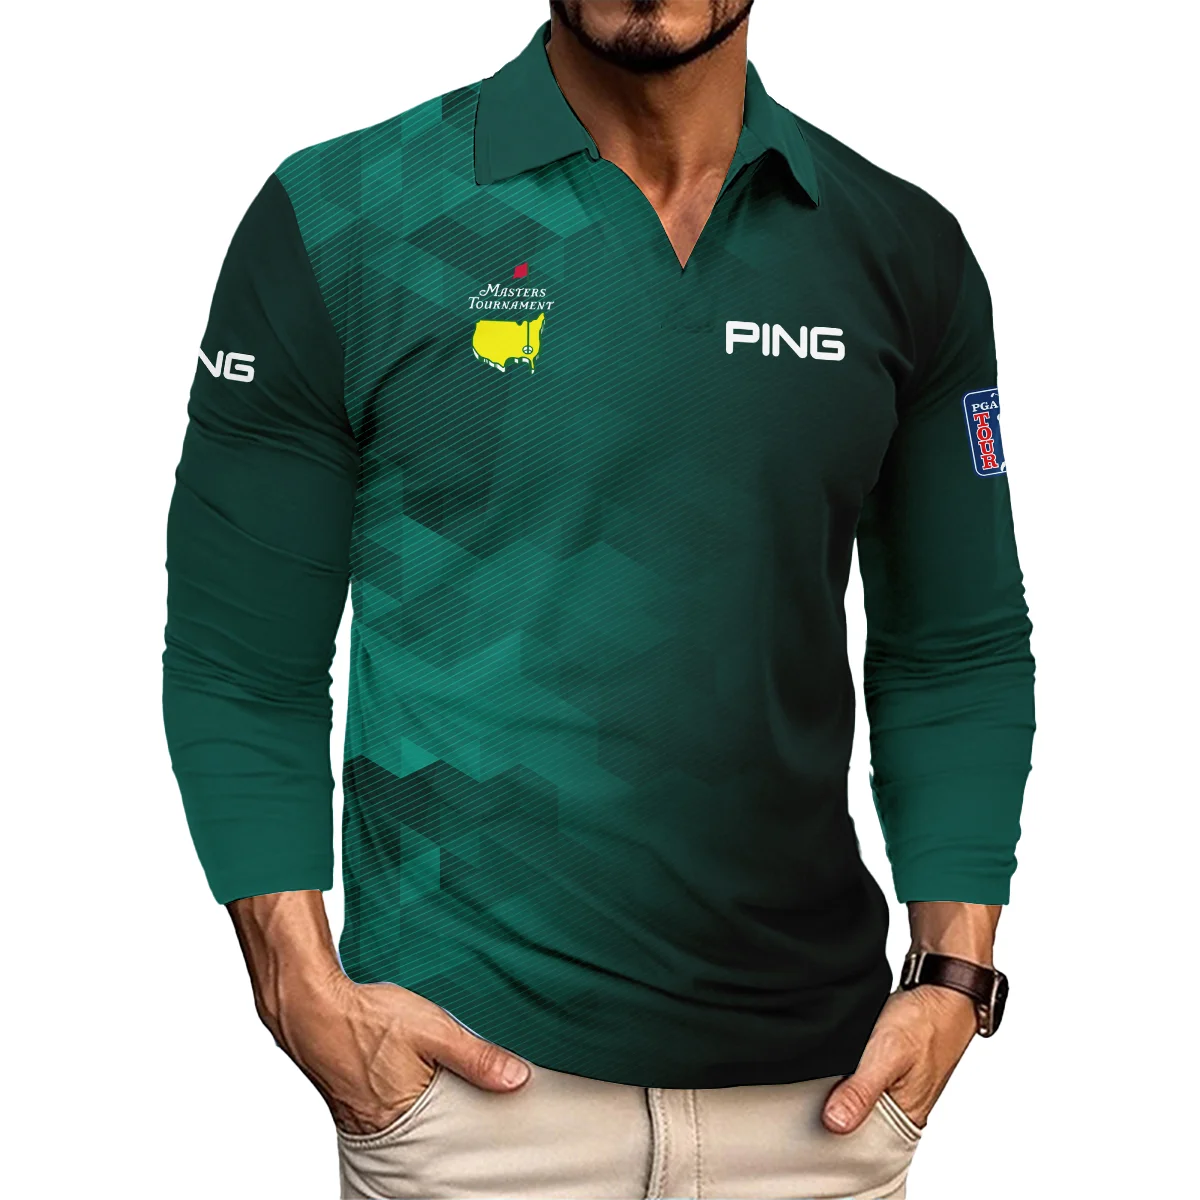 Ping Golf Sport Dark Green Gradient Abstract Background Masters Tournament Vneck Long Polo Shirt Style Classic Long Polo Shirt For Men